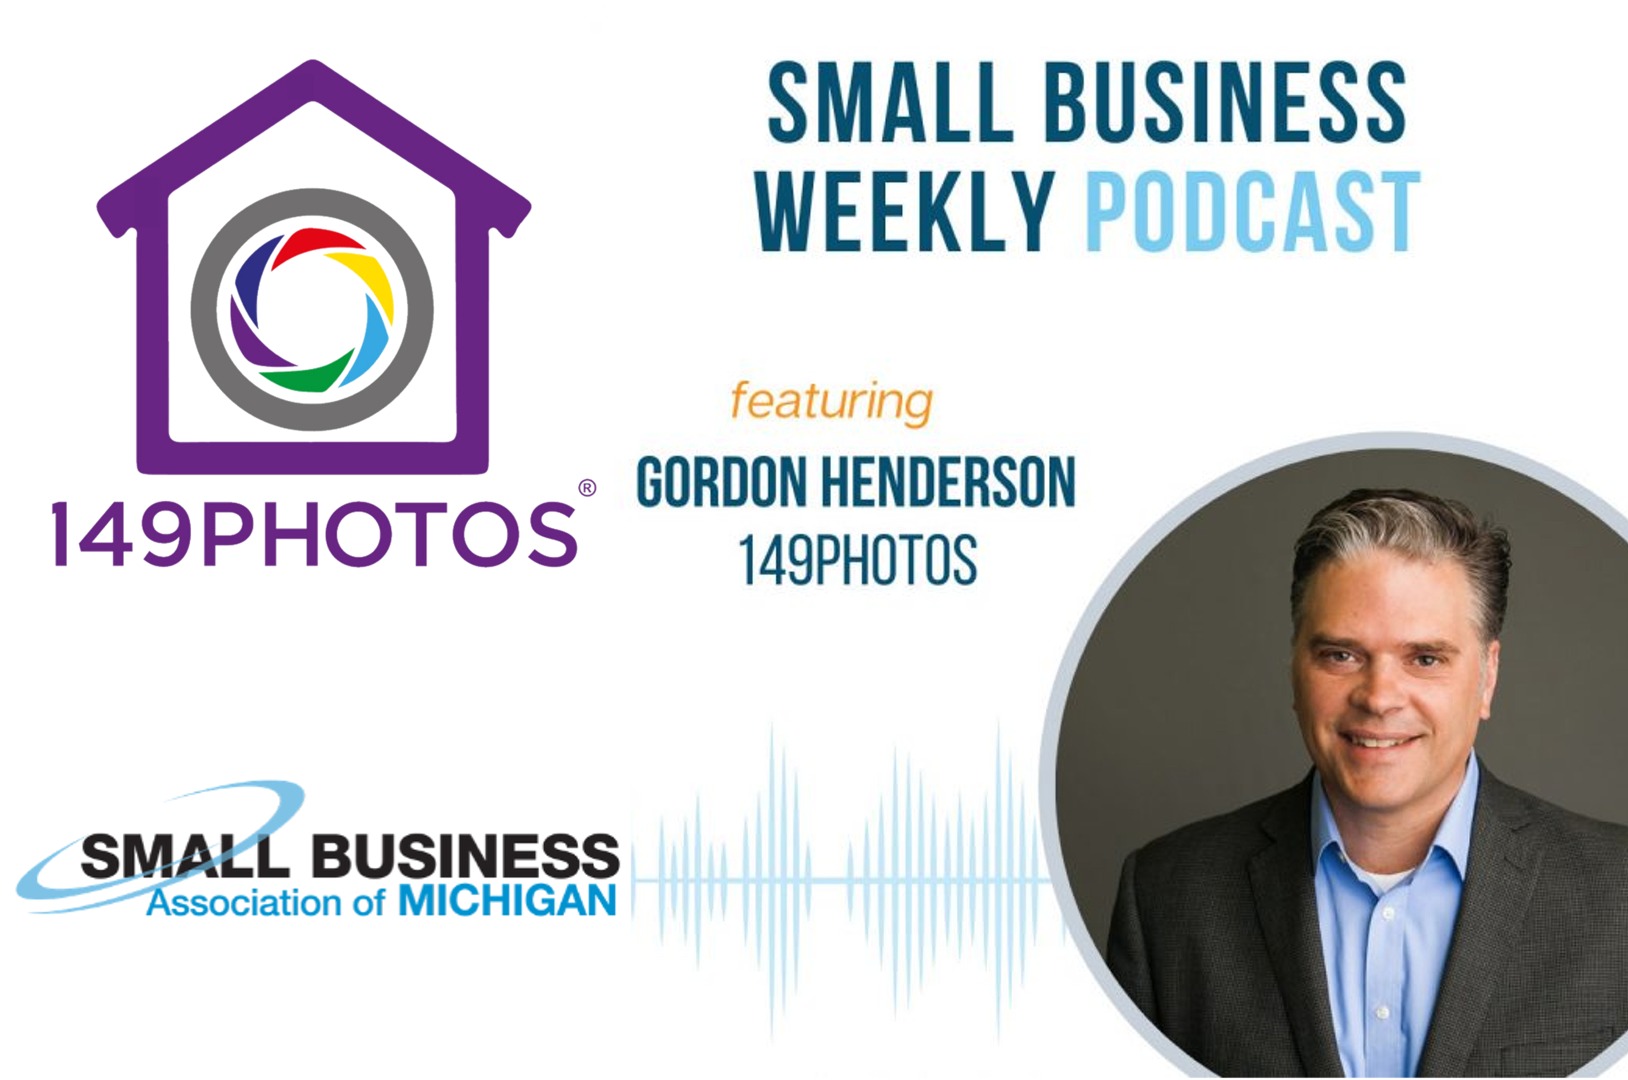 Small Business Association of Michigan logo and picture of Gordon Henderson